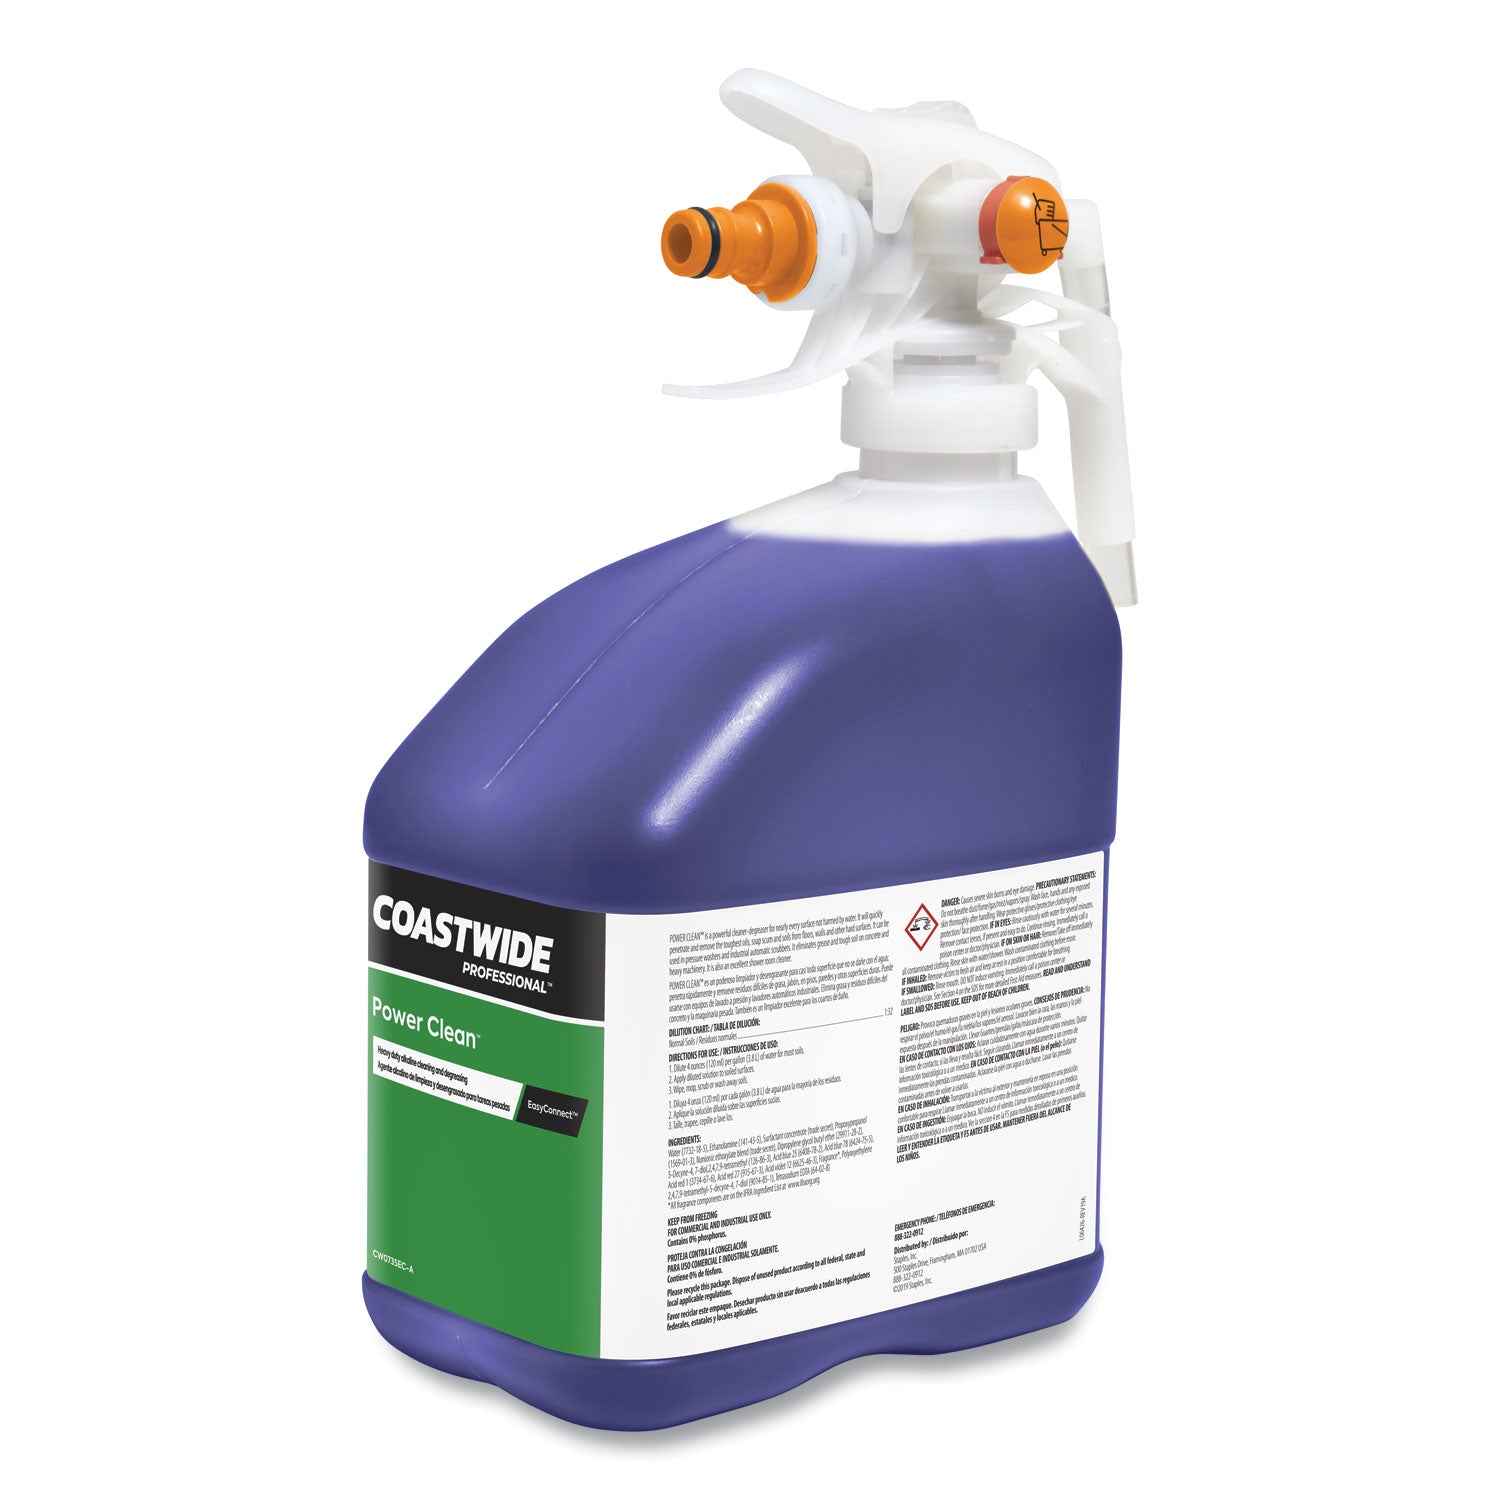 power-clean-heavy-duty-cleaner-degreaser-concentrate-for-easyconnect-systems-grape-scent-101-oz-bottle-2-carton_cwz24381047 - 4